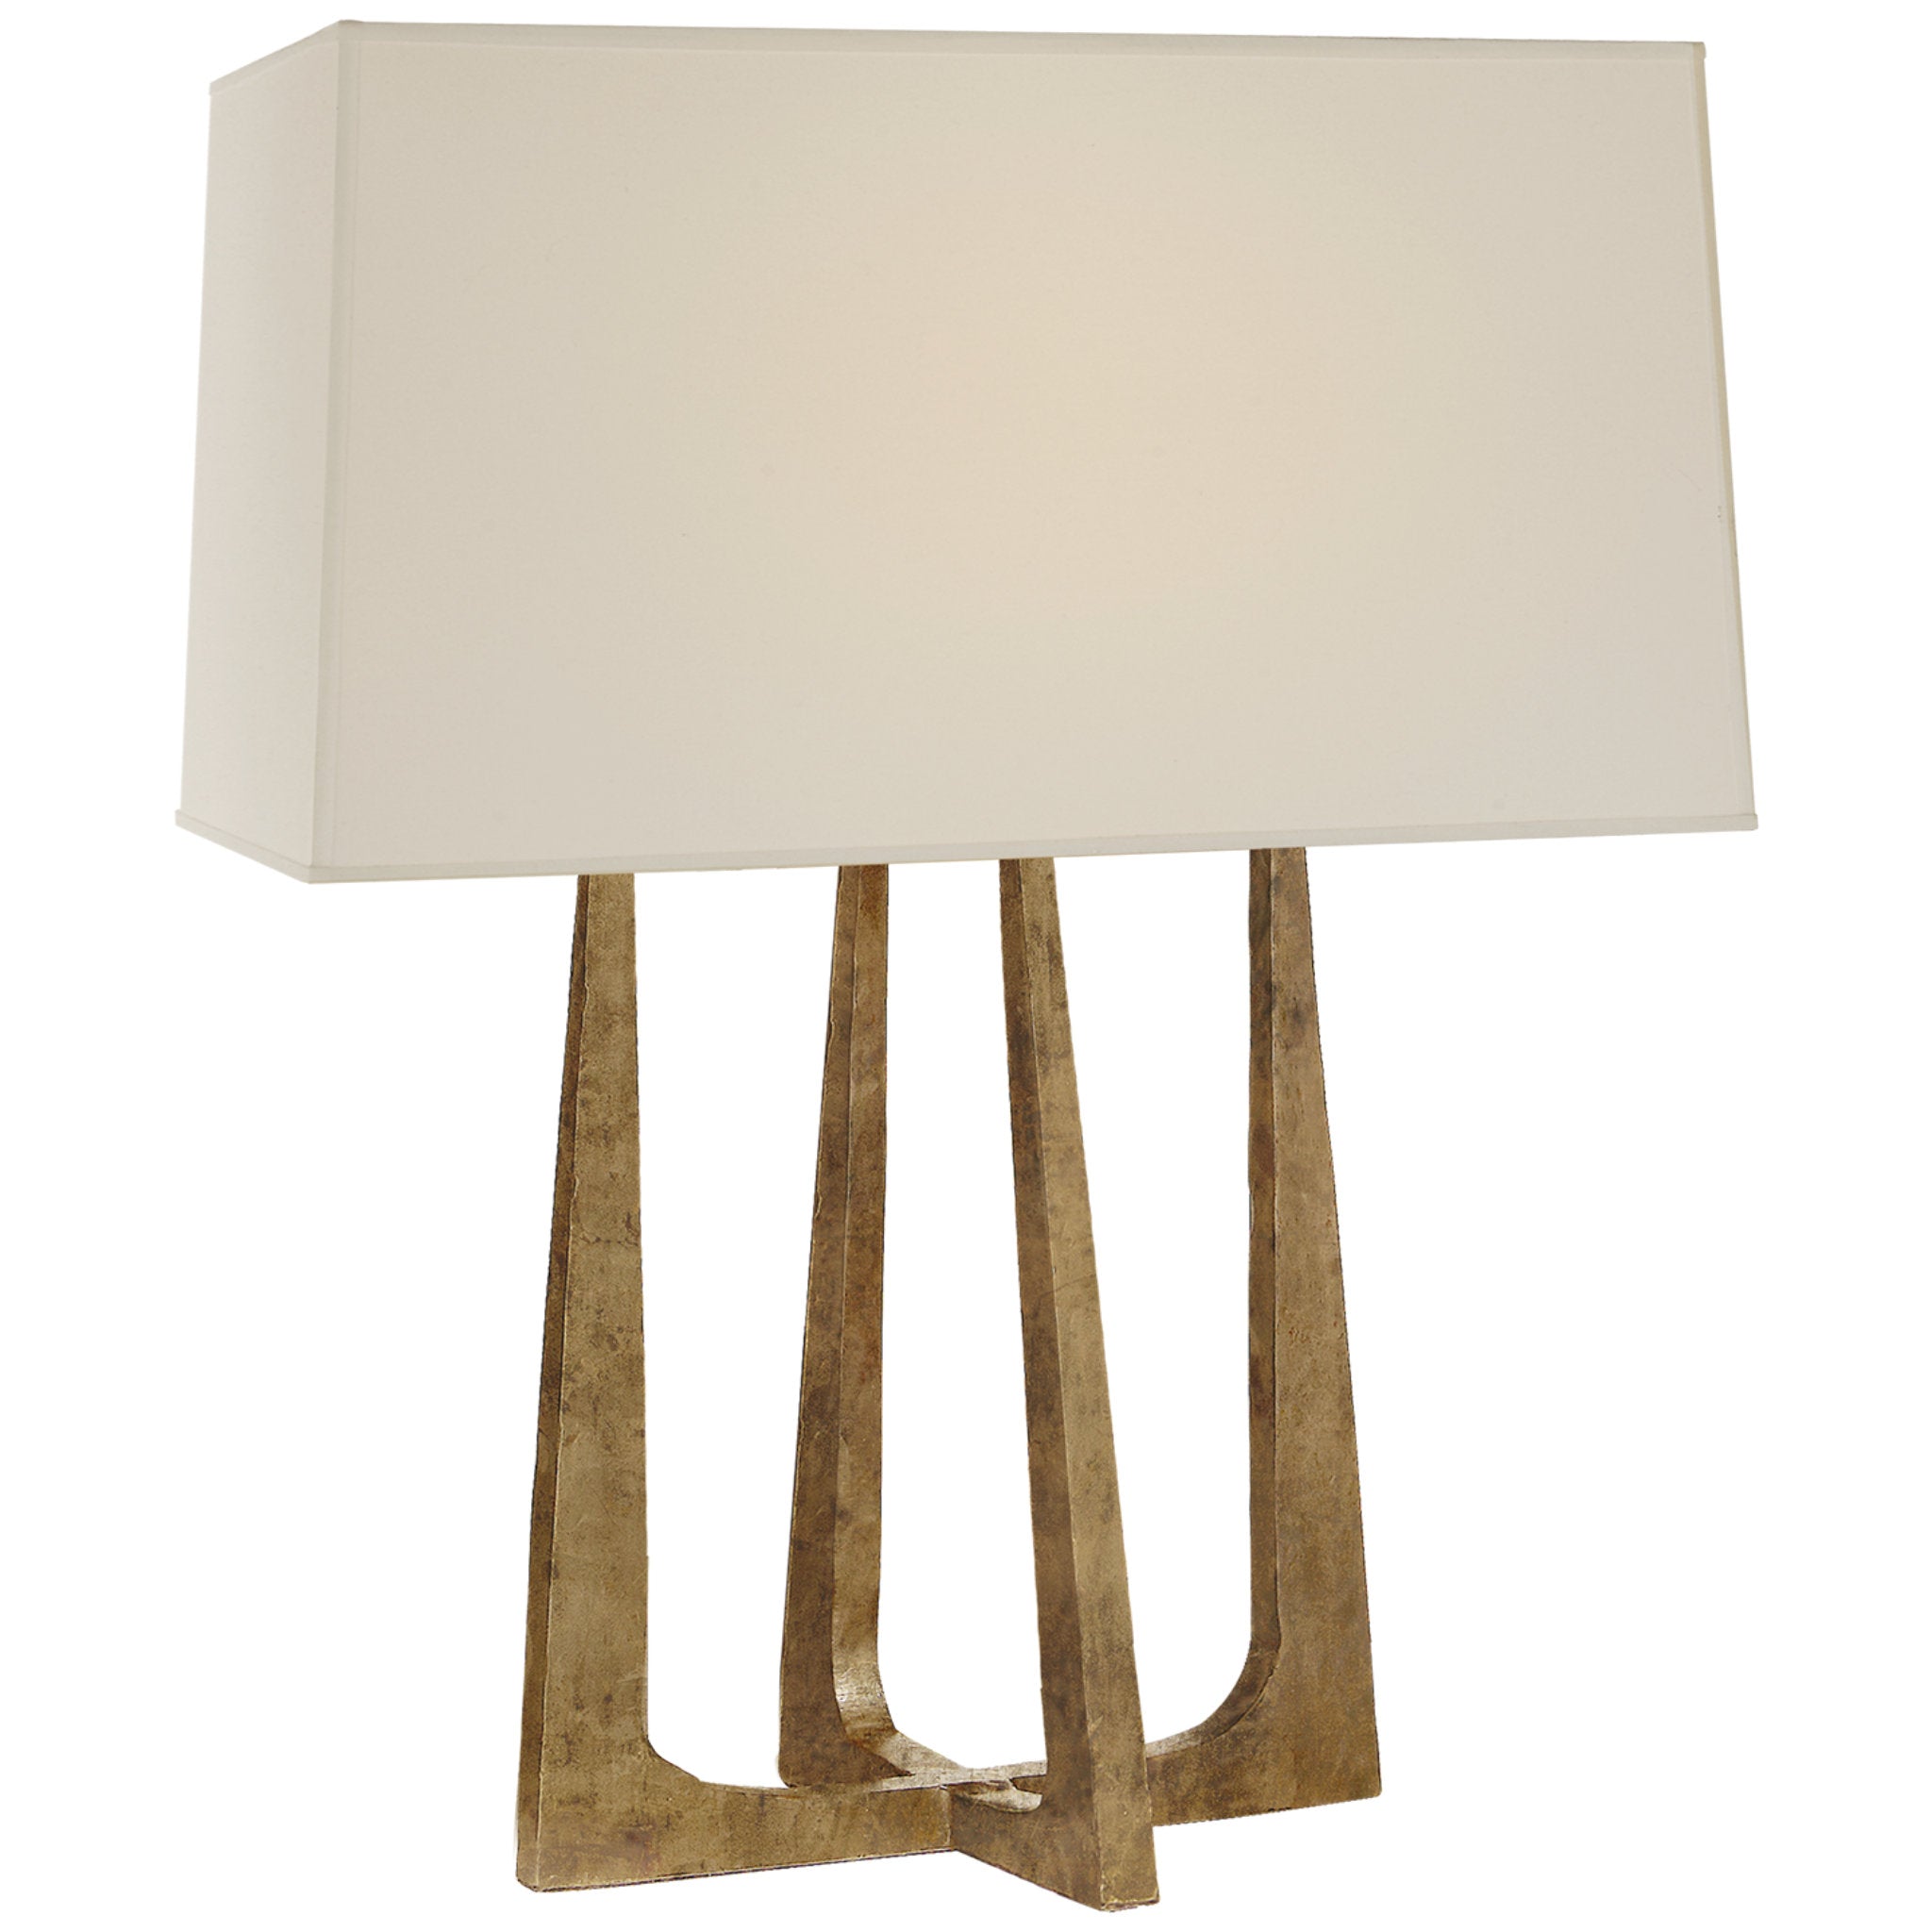 Ian K. Fowler Scala Hand-Forged Bedside Lamp in Gilded Iron with Natural Percale Shade